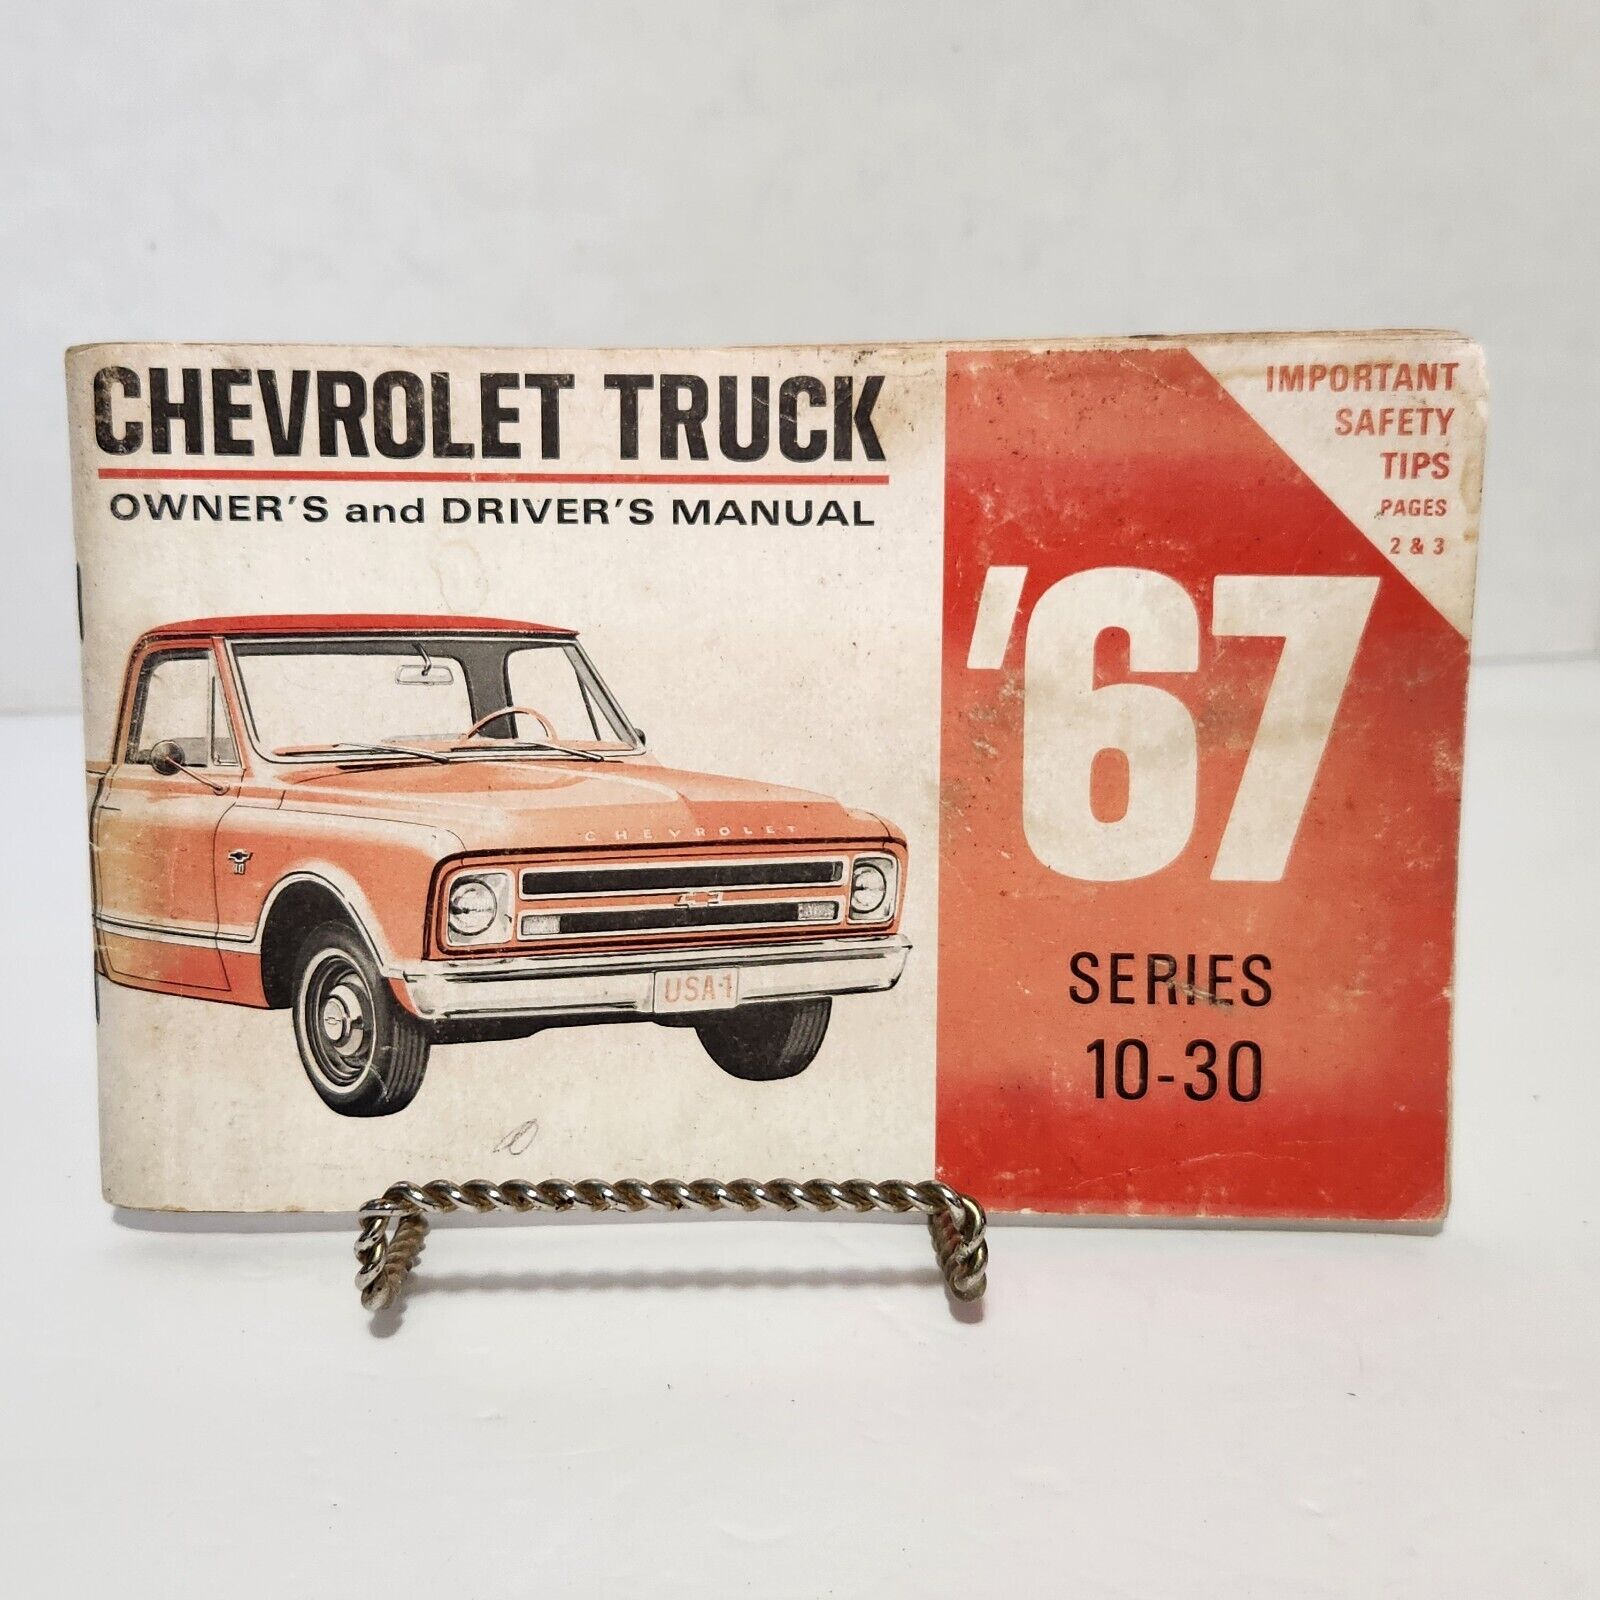 Vintage Original 1967 Chevrolet Truck Owner\'s and Driver\'s Manual Series 10-30